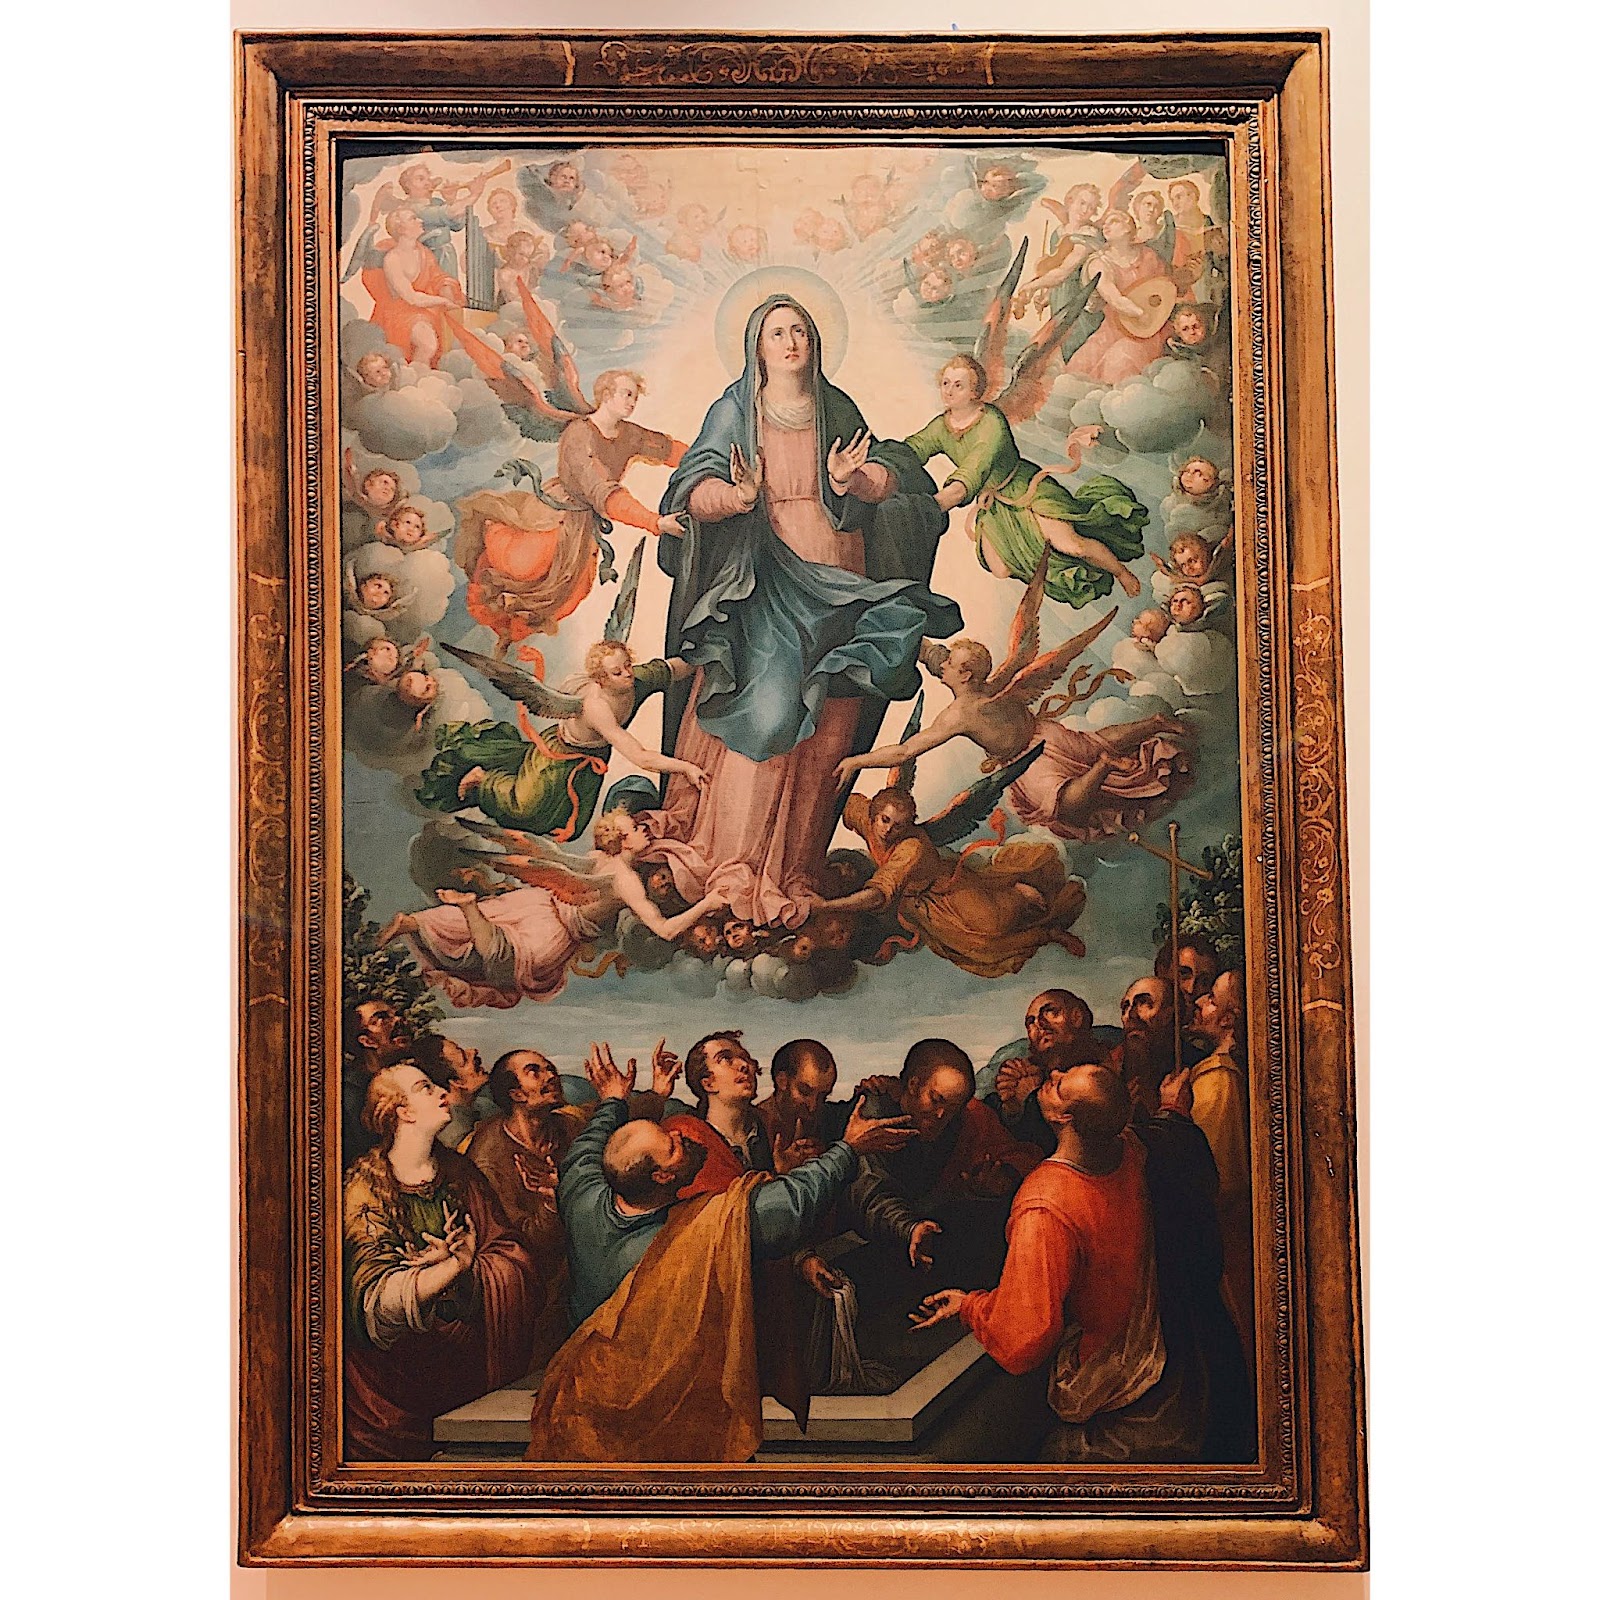 A painting called Assumption of the Virgin by Titan. It is located inside Mexico City's National Art Museum